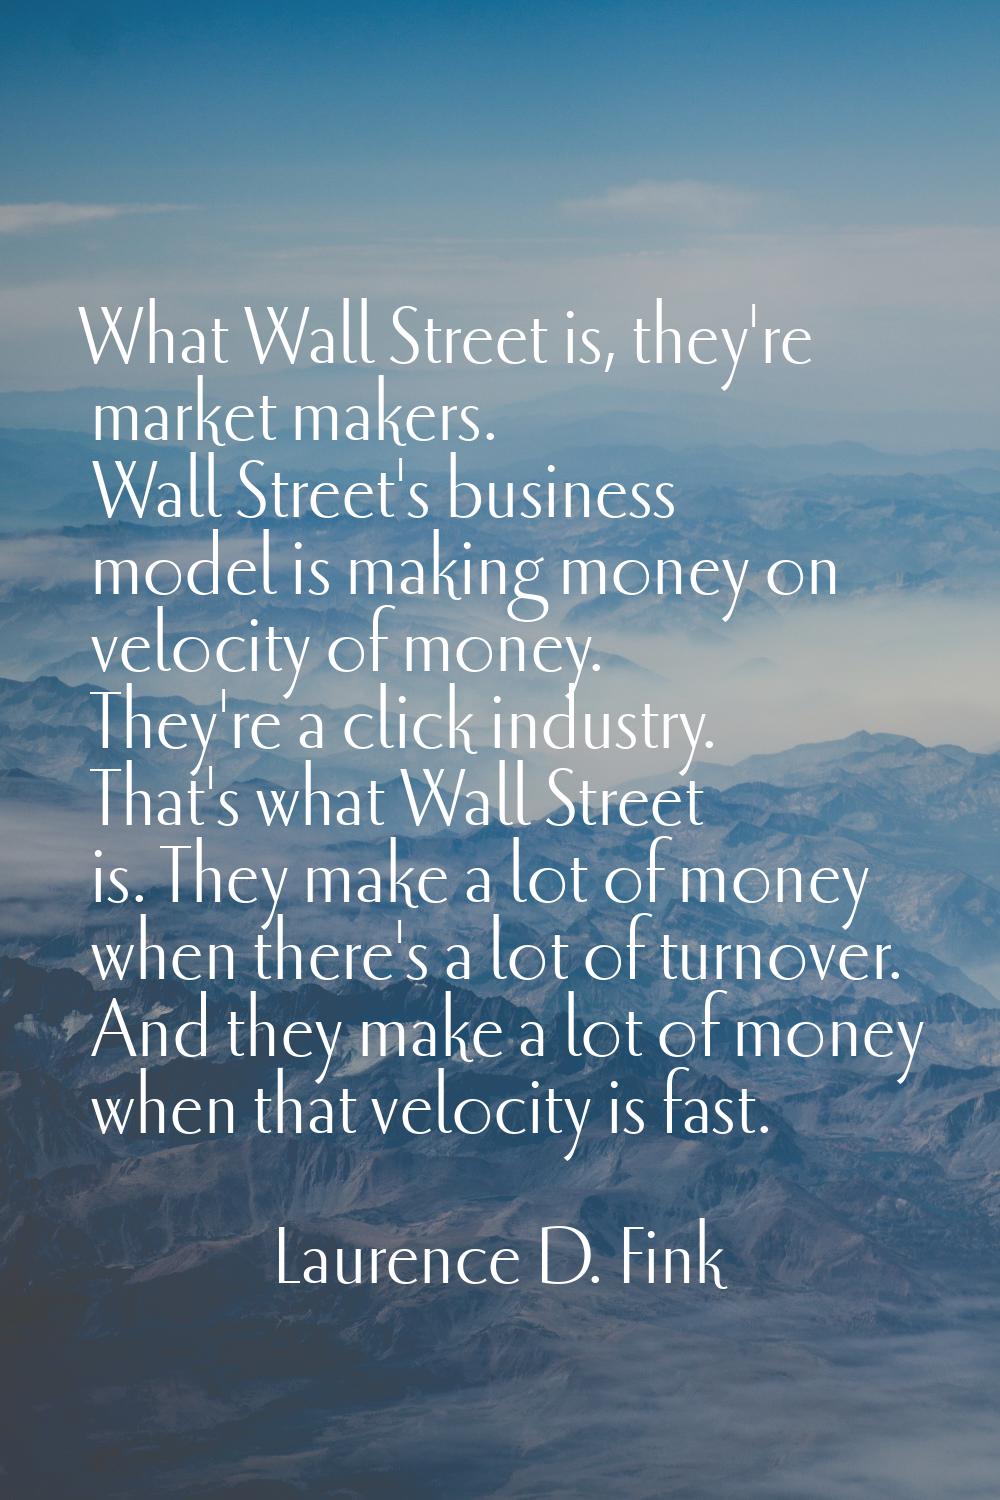 What Wall Street is, they're market makers. Wall Street's business model is making money on velocit